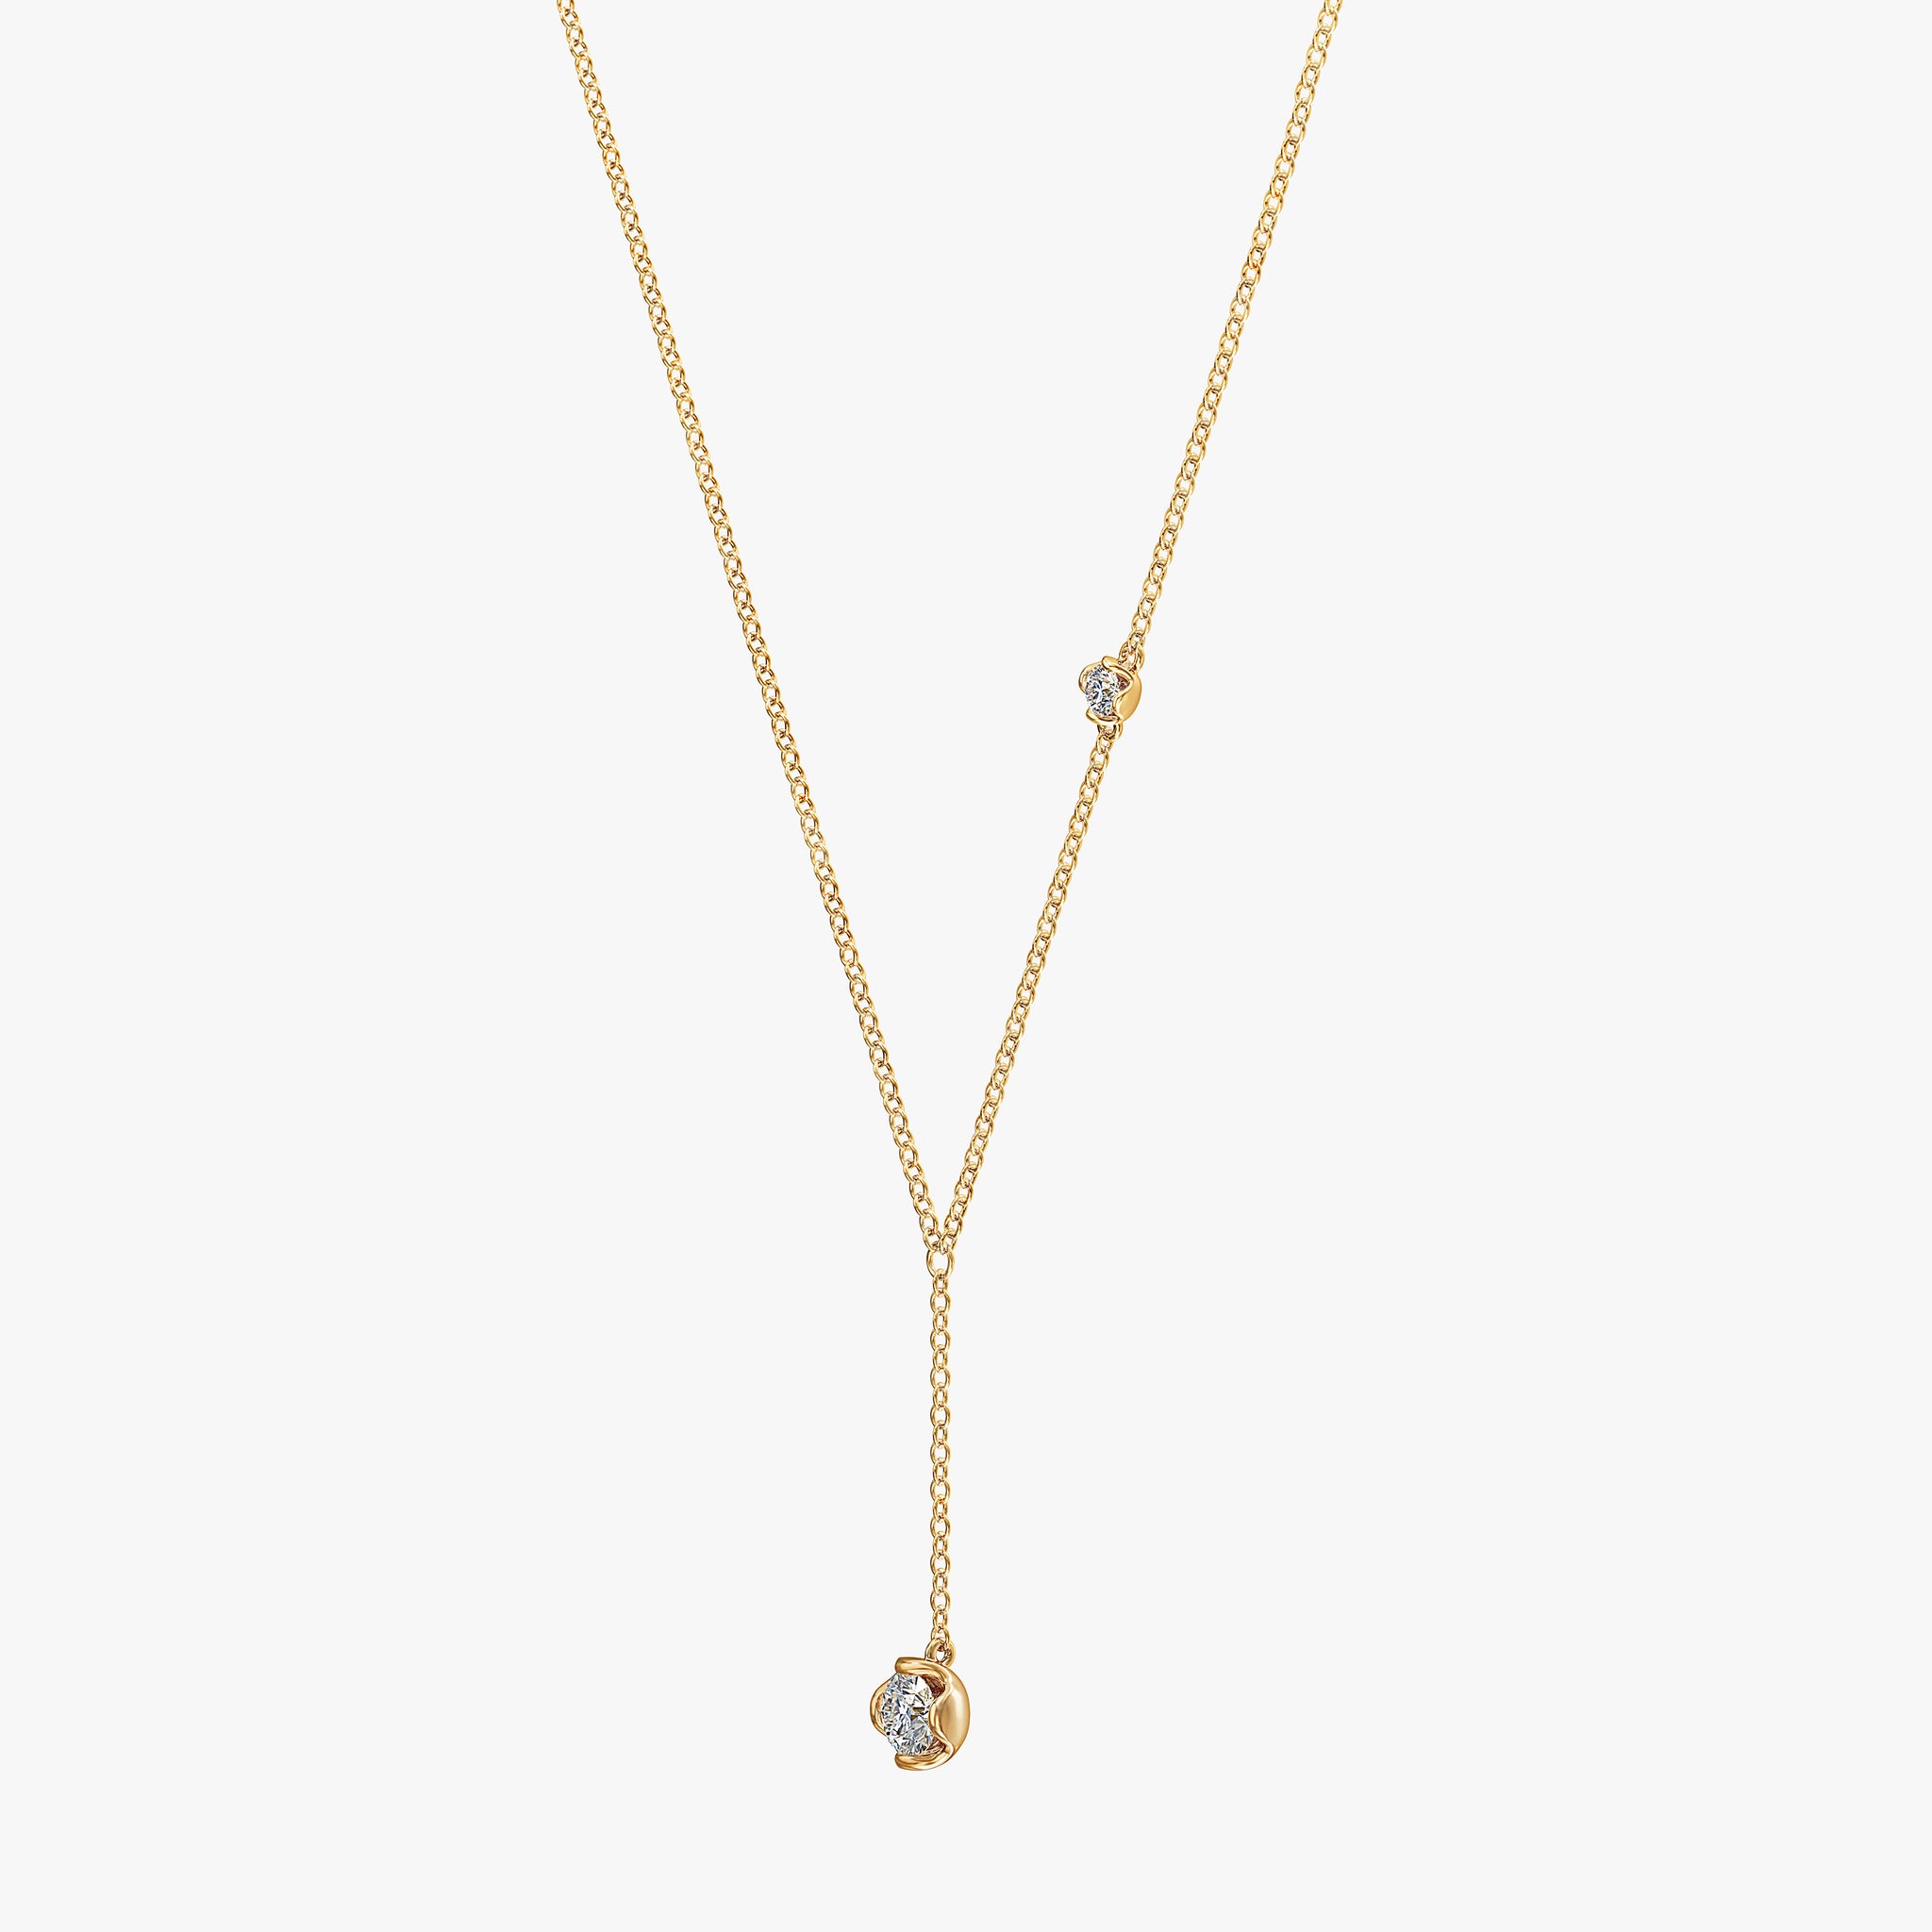 J'EVAR 14KT Yellow Gold Lariat ALTR Lab Grown Diamond Necklace Perspective View